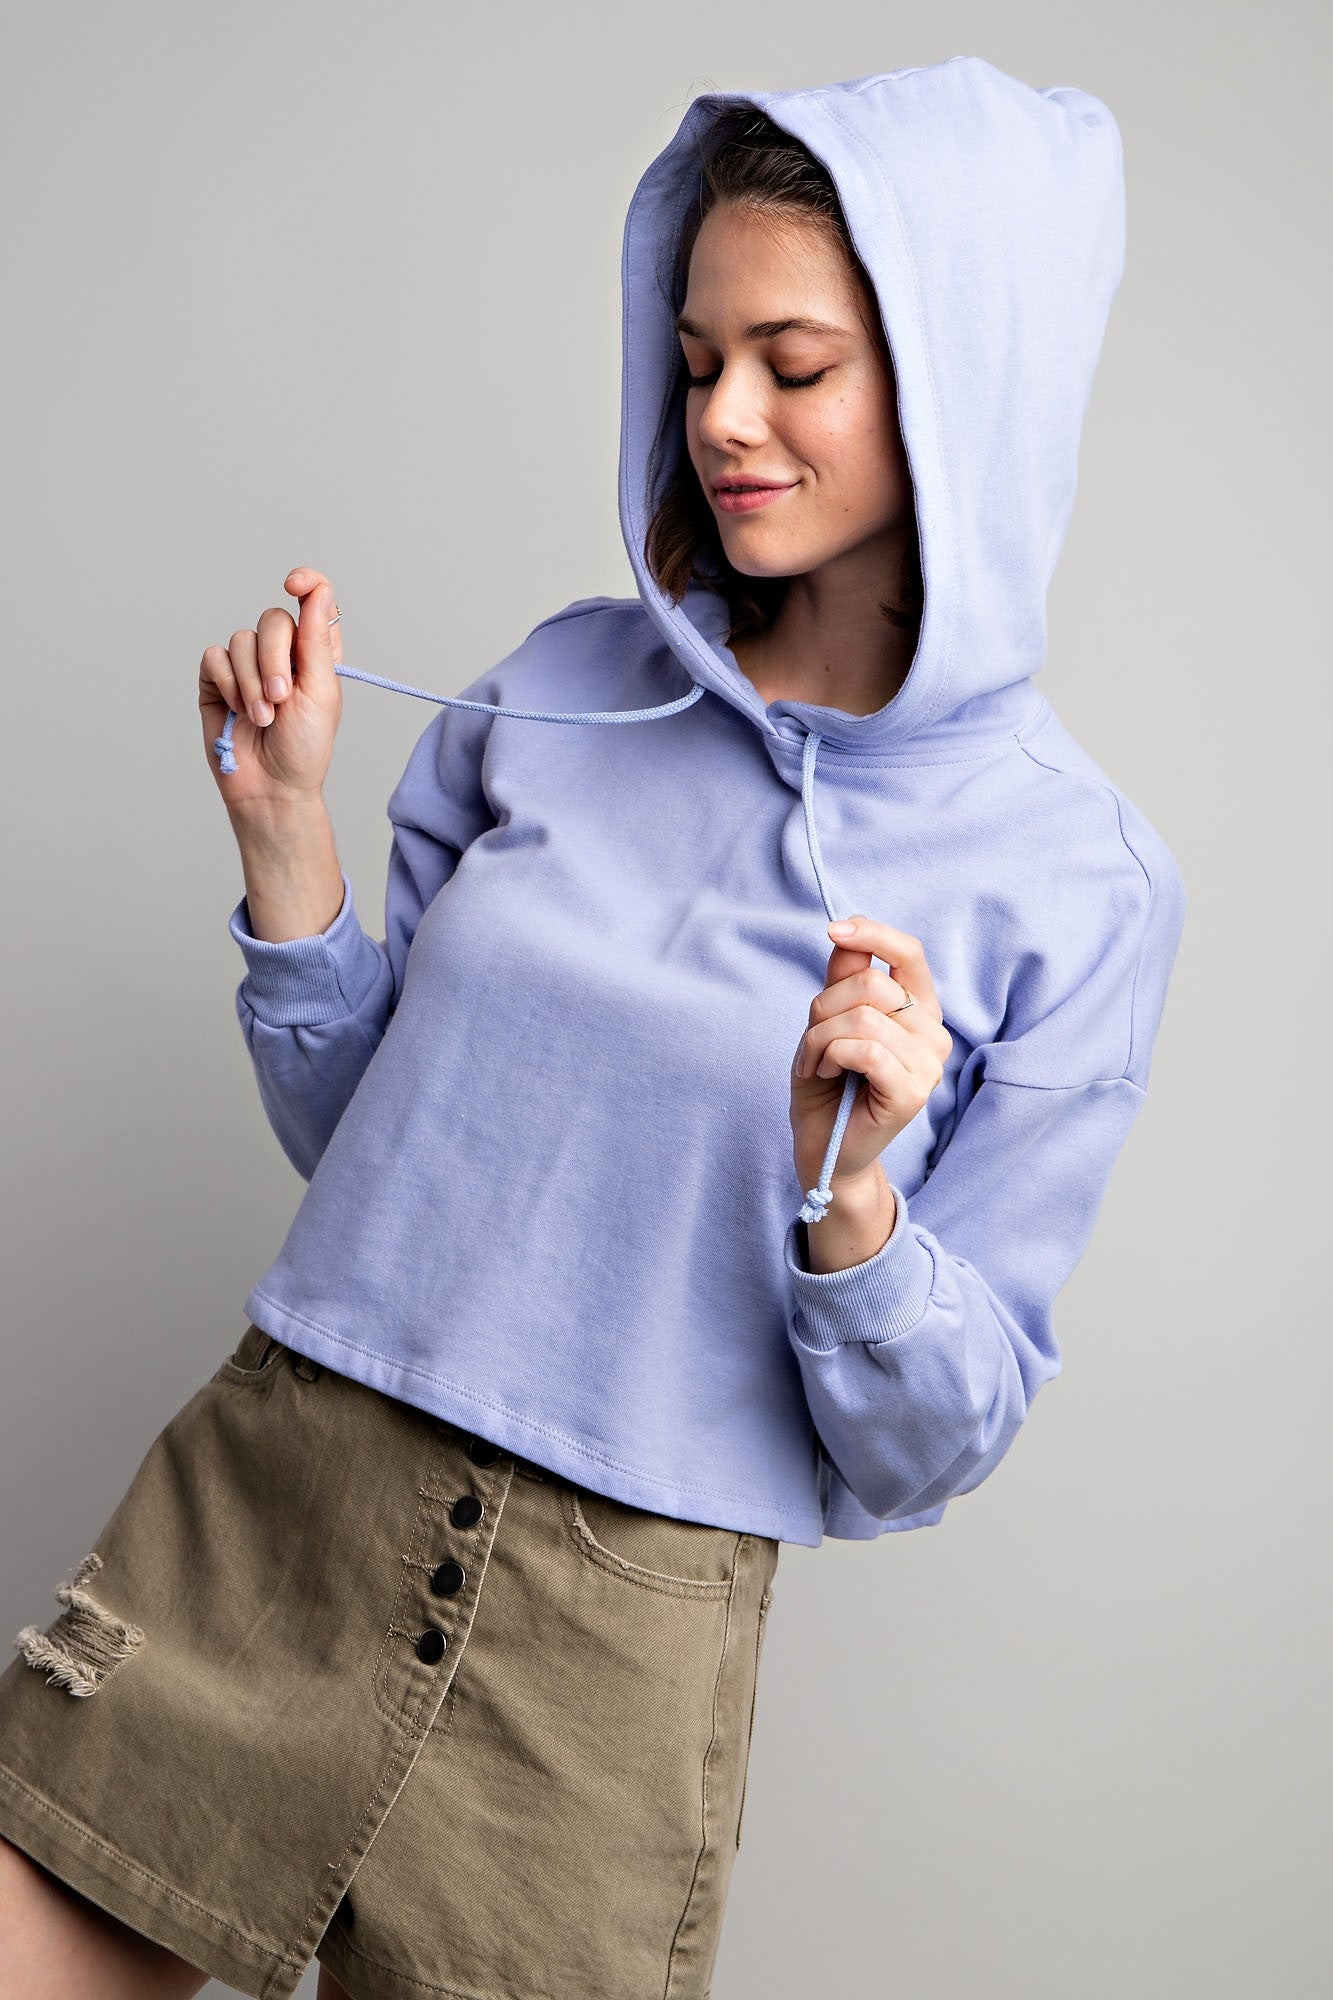 Easel Lilac Blue Adjustable Drawstring Terry Knit Pullover Loose Fit Hoodie - Roulhac Fashion Boutique